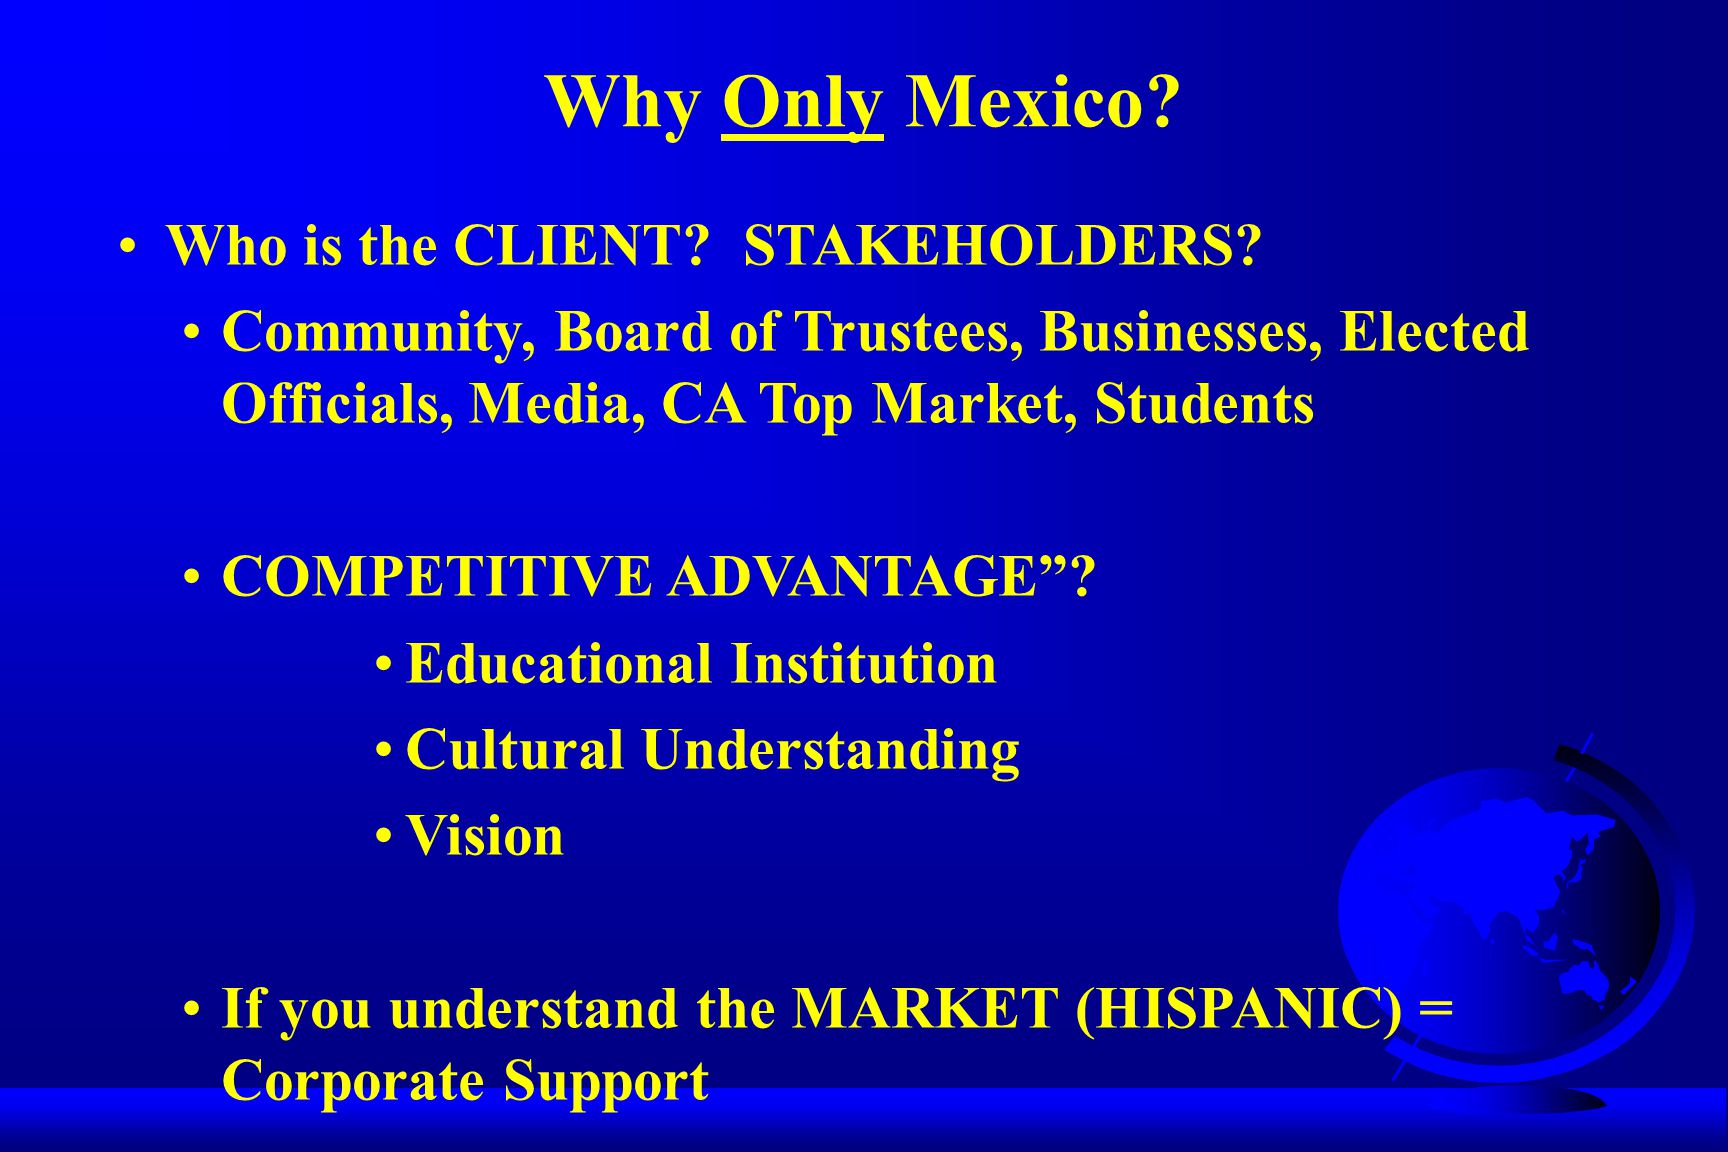 Why Only Mexico. Who is the CLIENT. STAKEHOLDERS.